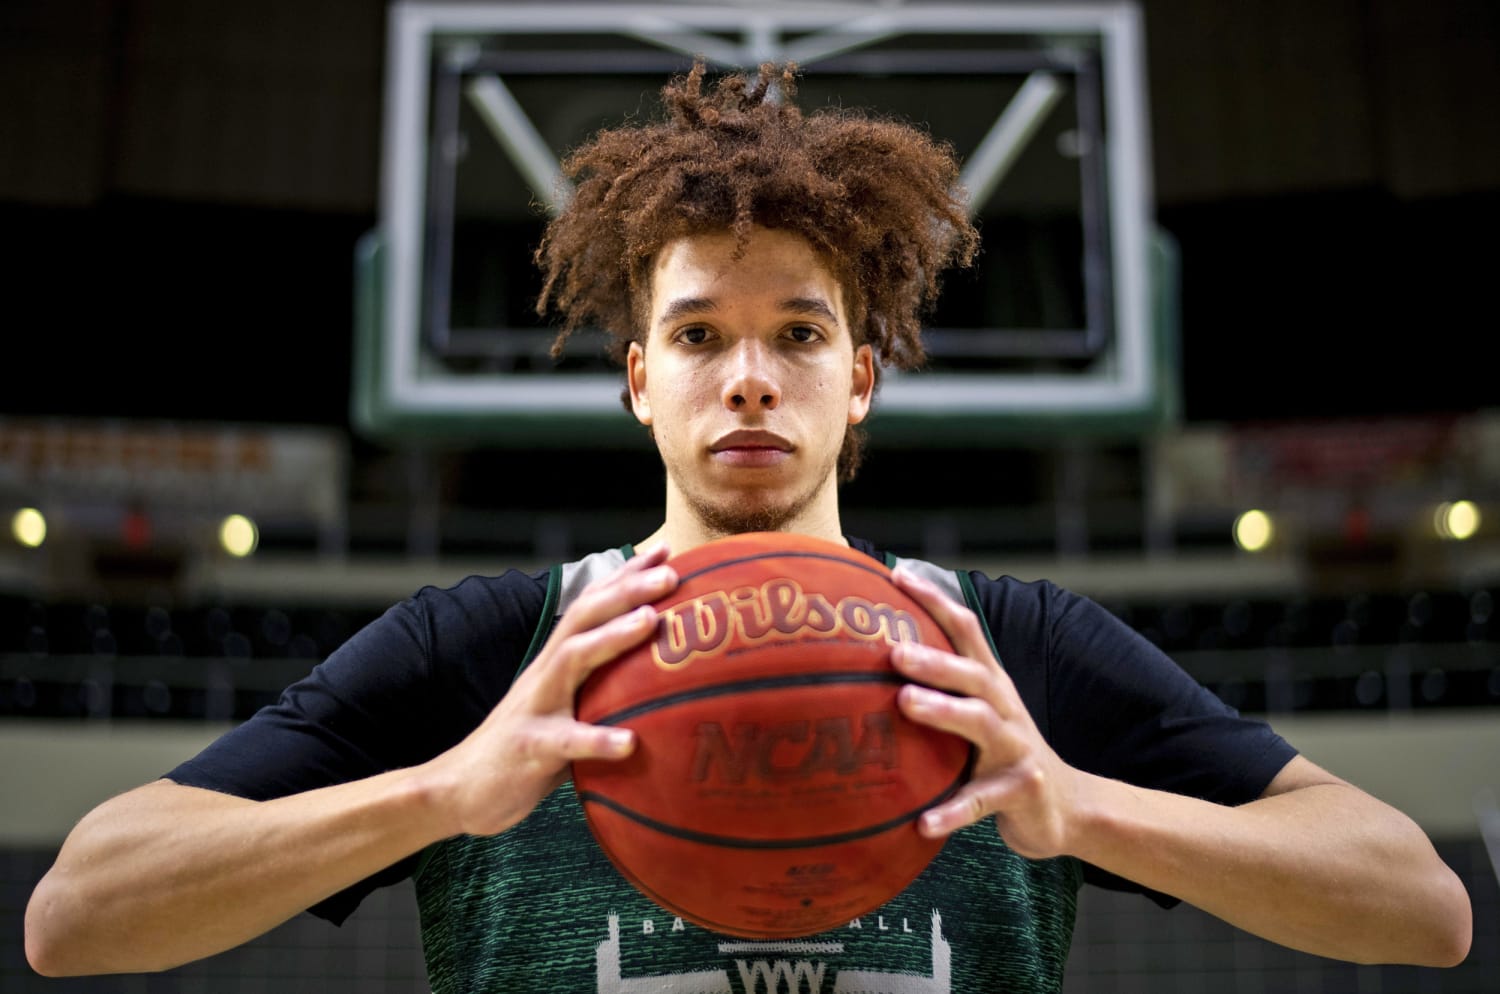 Ohio University basketball standout overcomes tragedy and HS career on bench en route to stardom picture